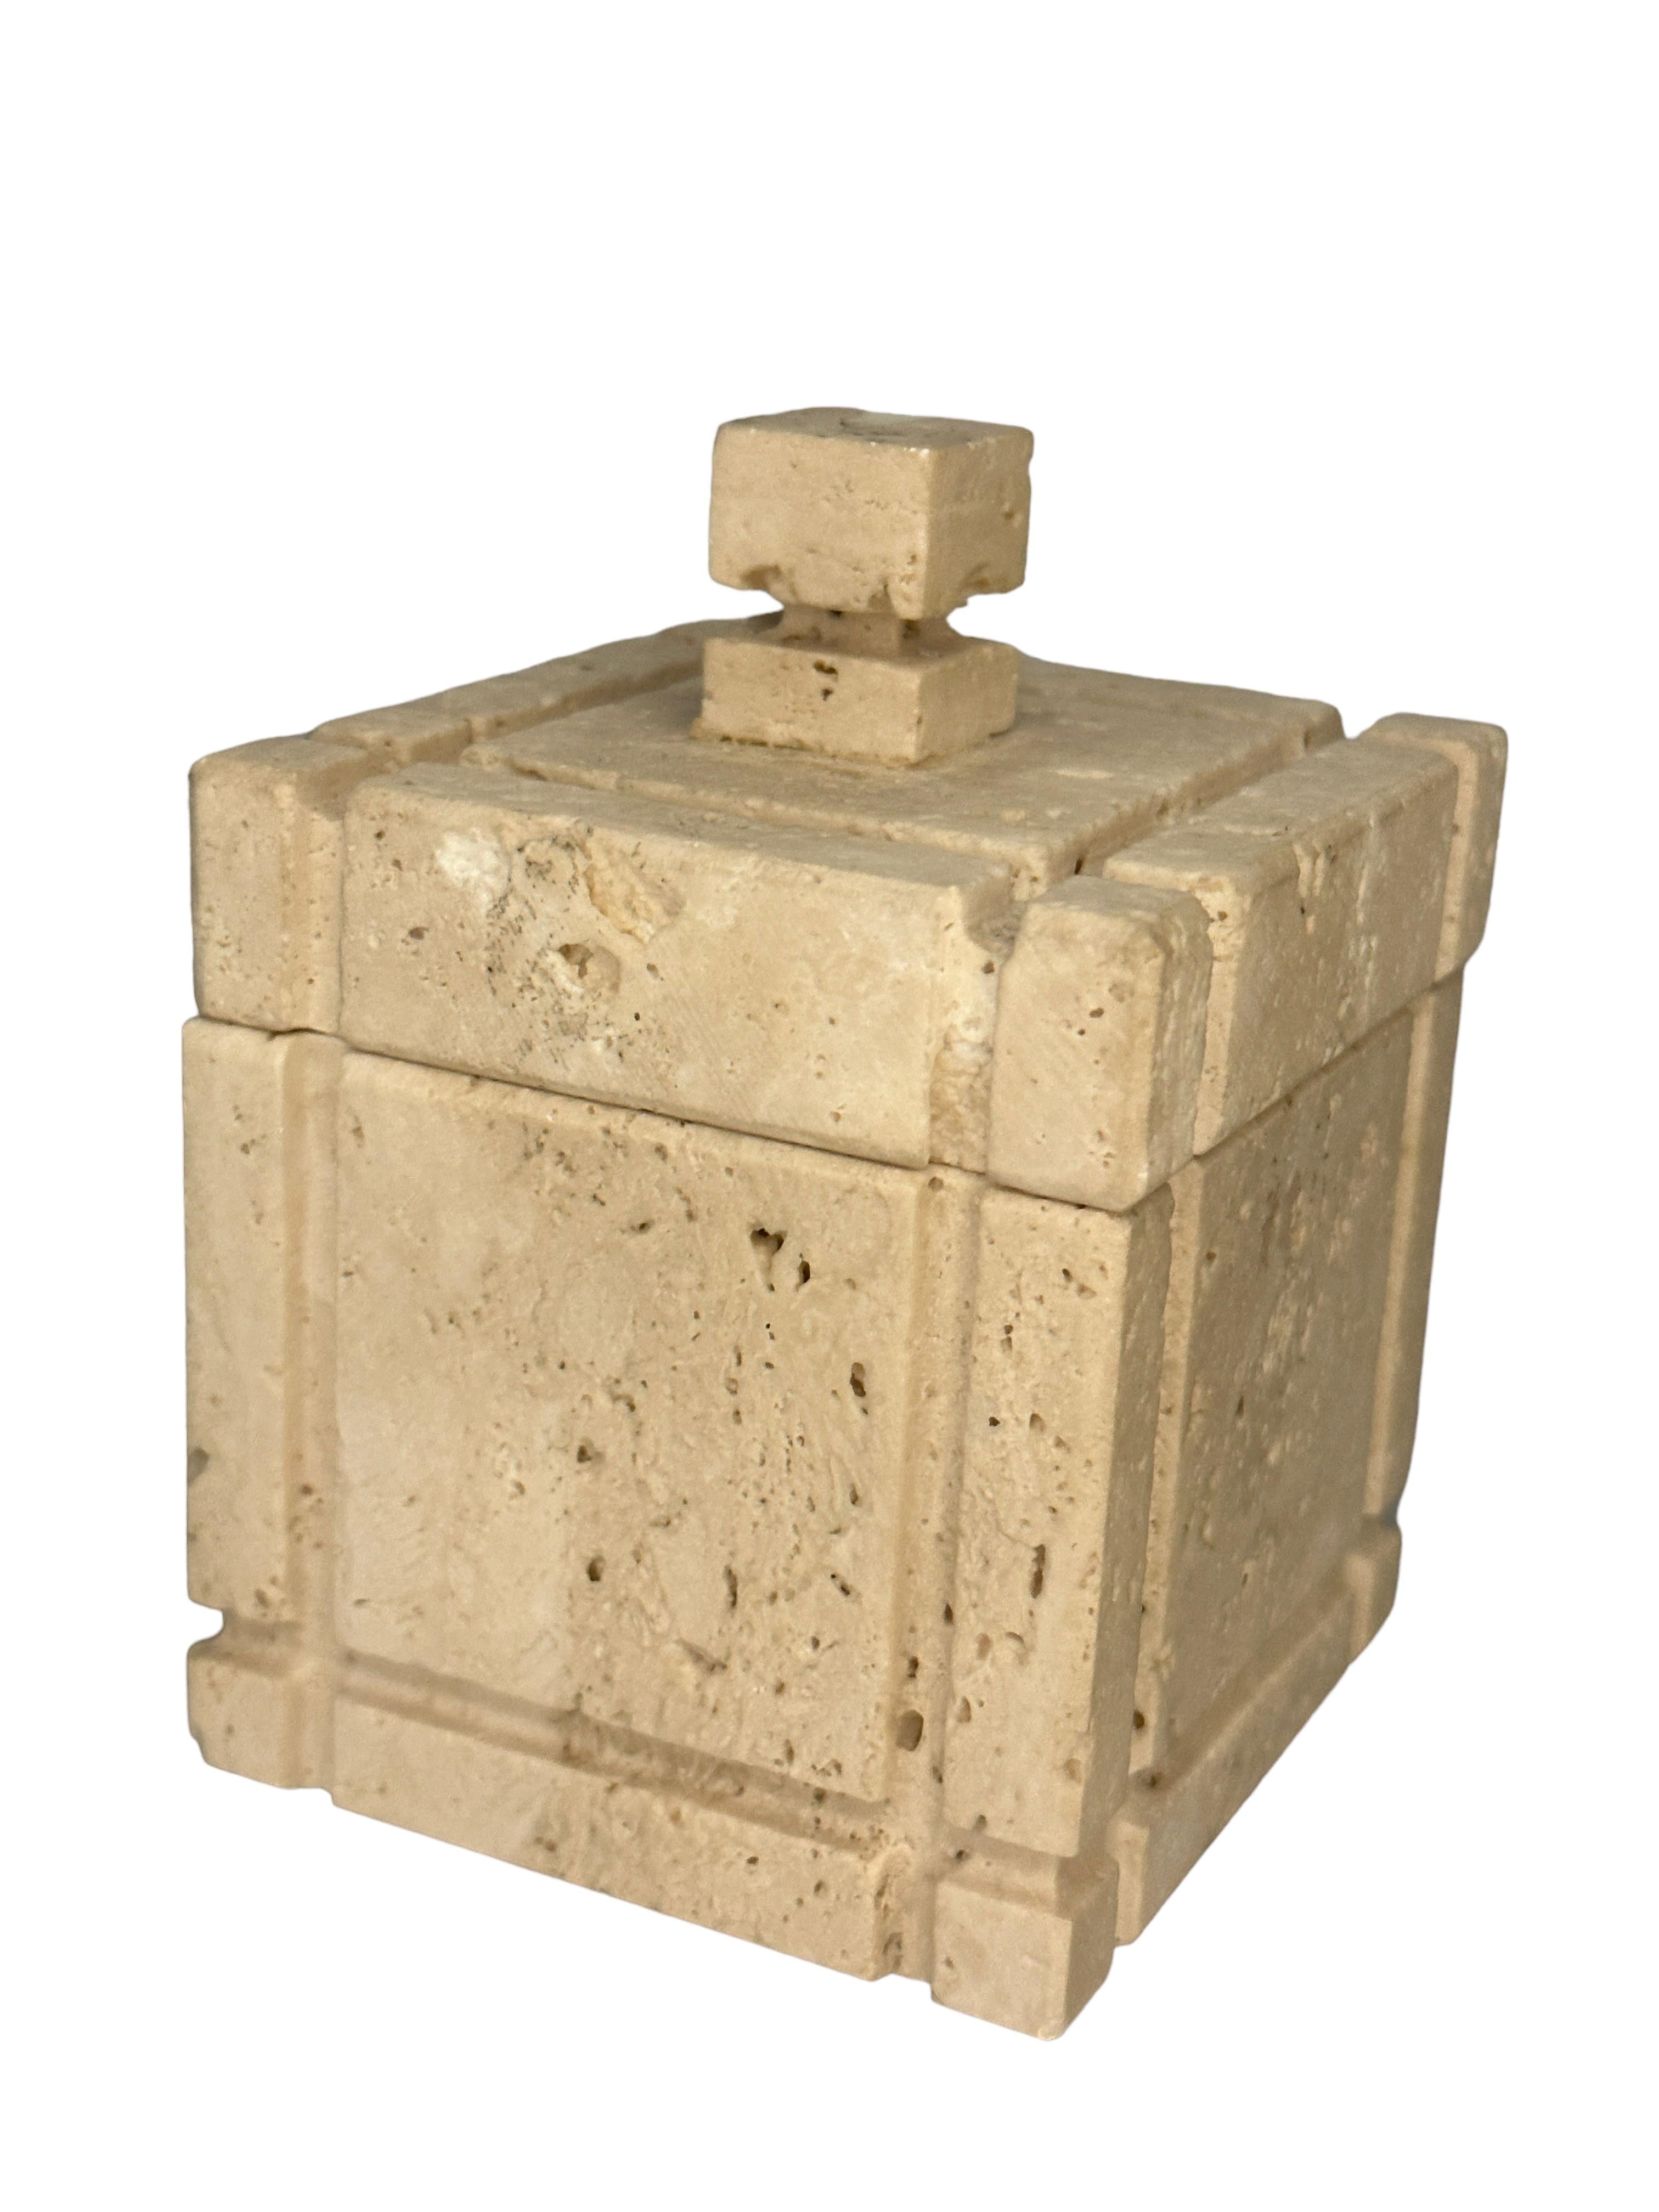 Midcentury Travertine Marble Italian Box Catchall by Fratelli Manelli, 1970s For Sale 1